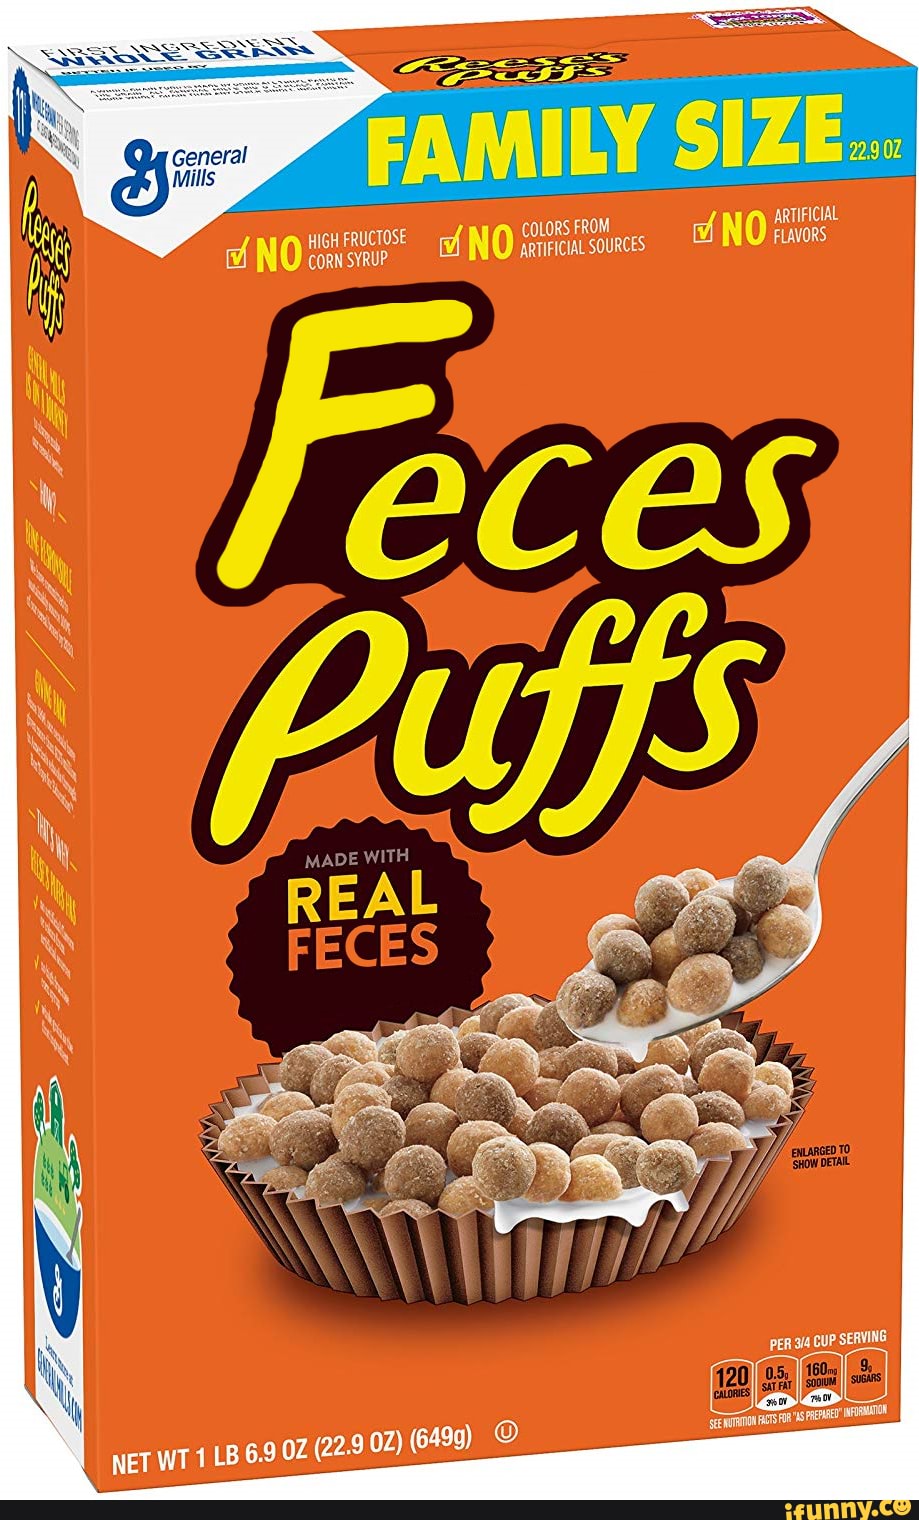 FAMILY SIZE: General Mills HIGH ERUCTOSE NO COLORS FROM NO ARTIFICIAL CORN SYRUP...